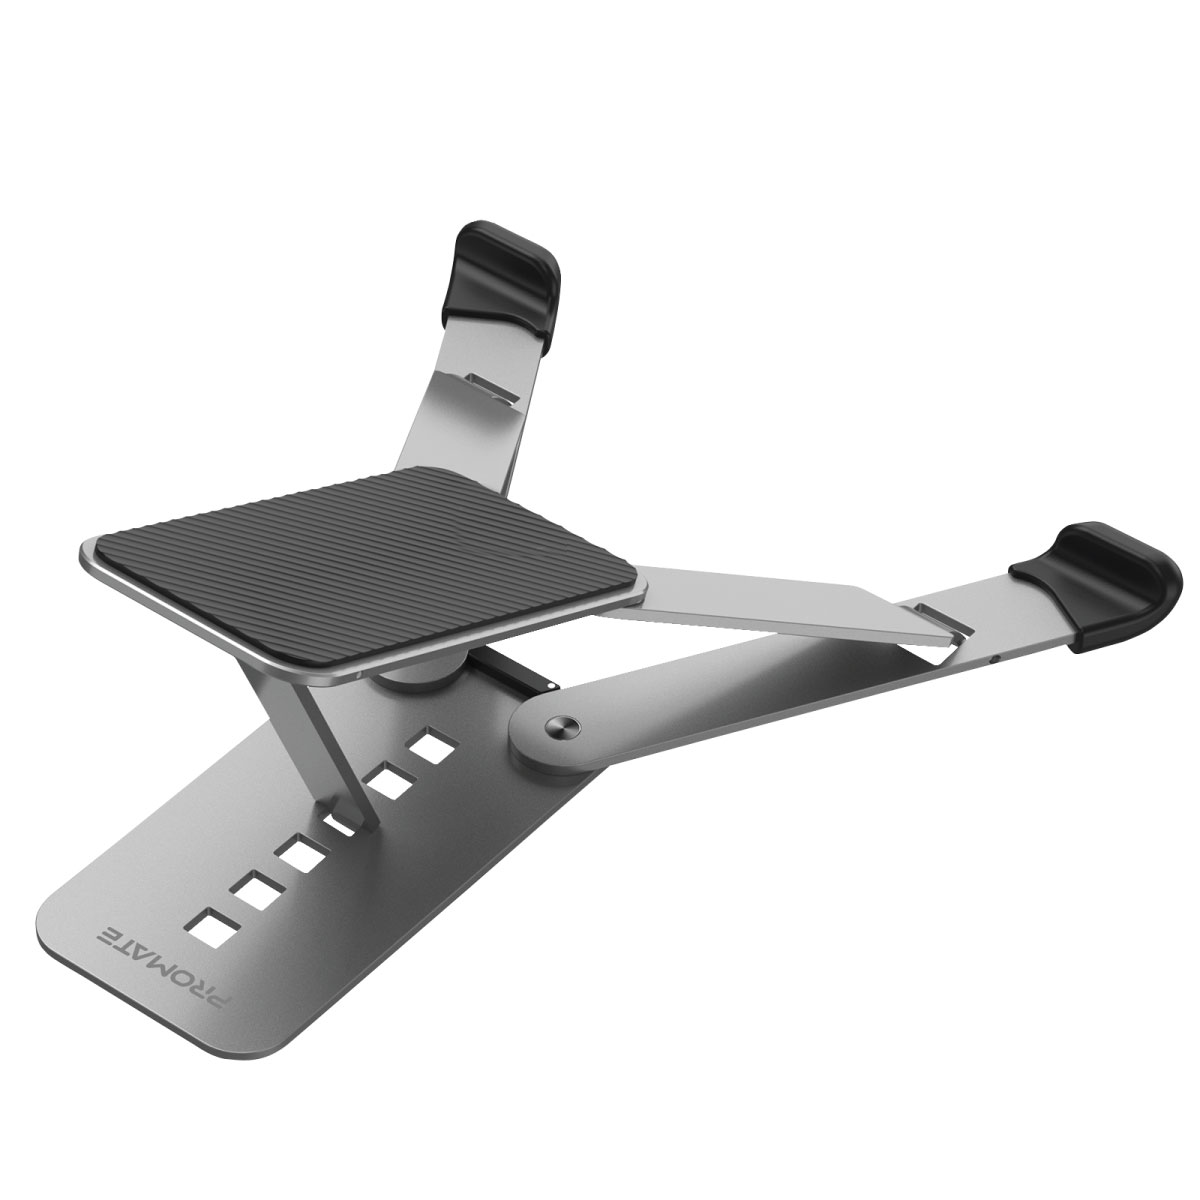 Promate Laptop Stand with Optimized Air Ventilation, Adjustable Height and Foldable Design, PocketMount Grey